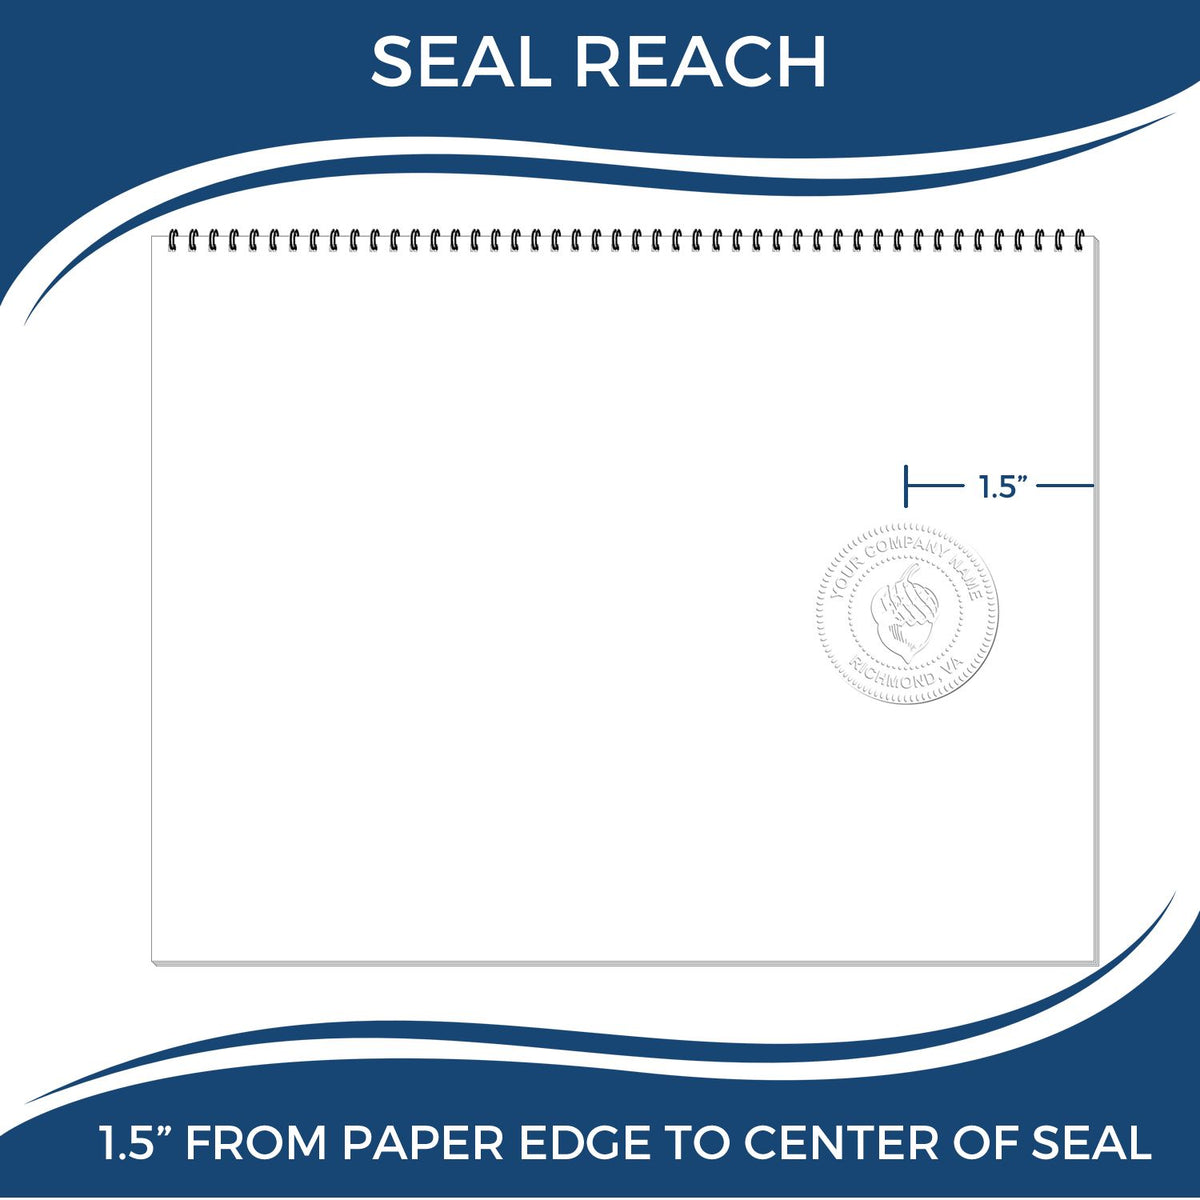 An infographic showing the seal reach which is represented by a ruler and a miniature seal image of the Utah Geologist Desk Seal